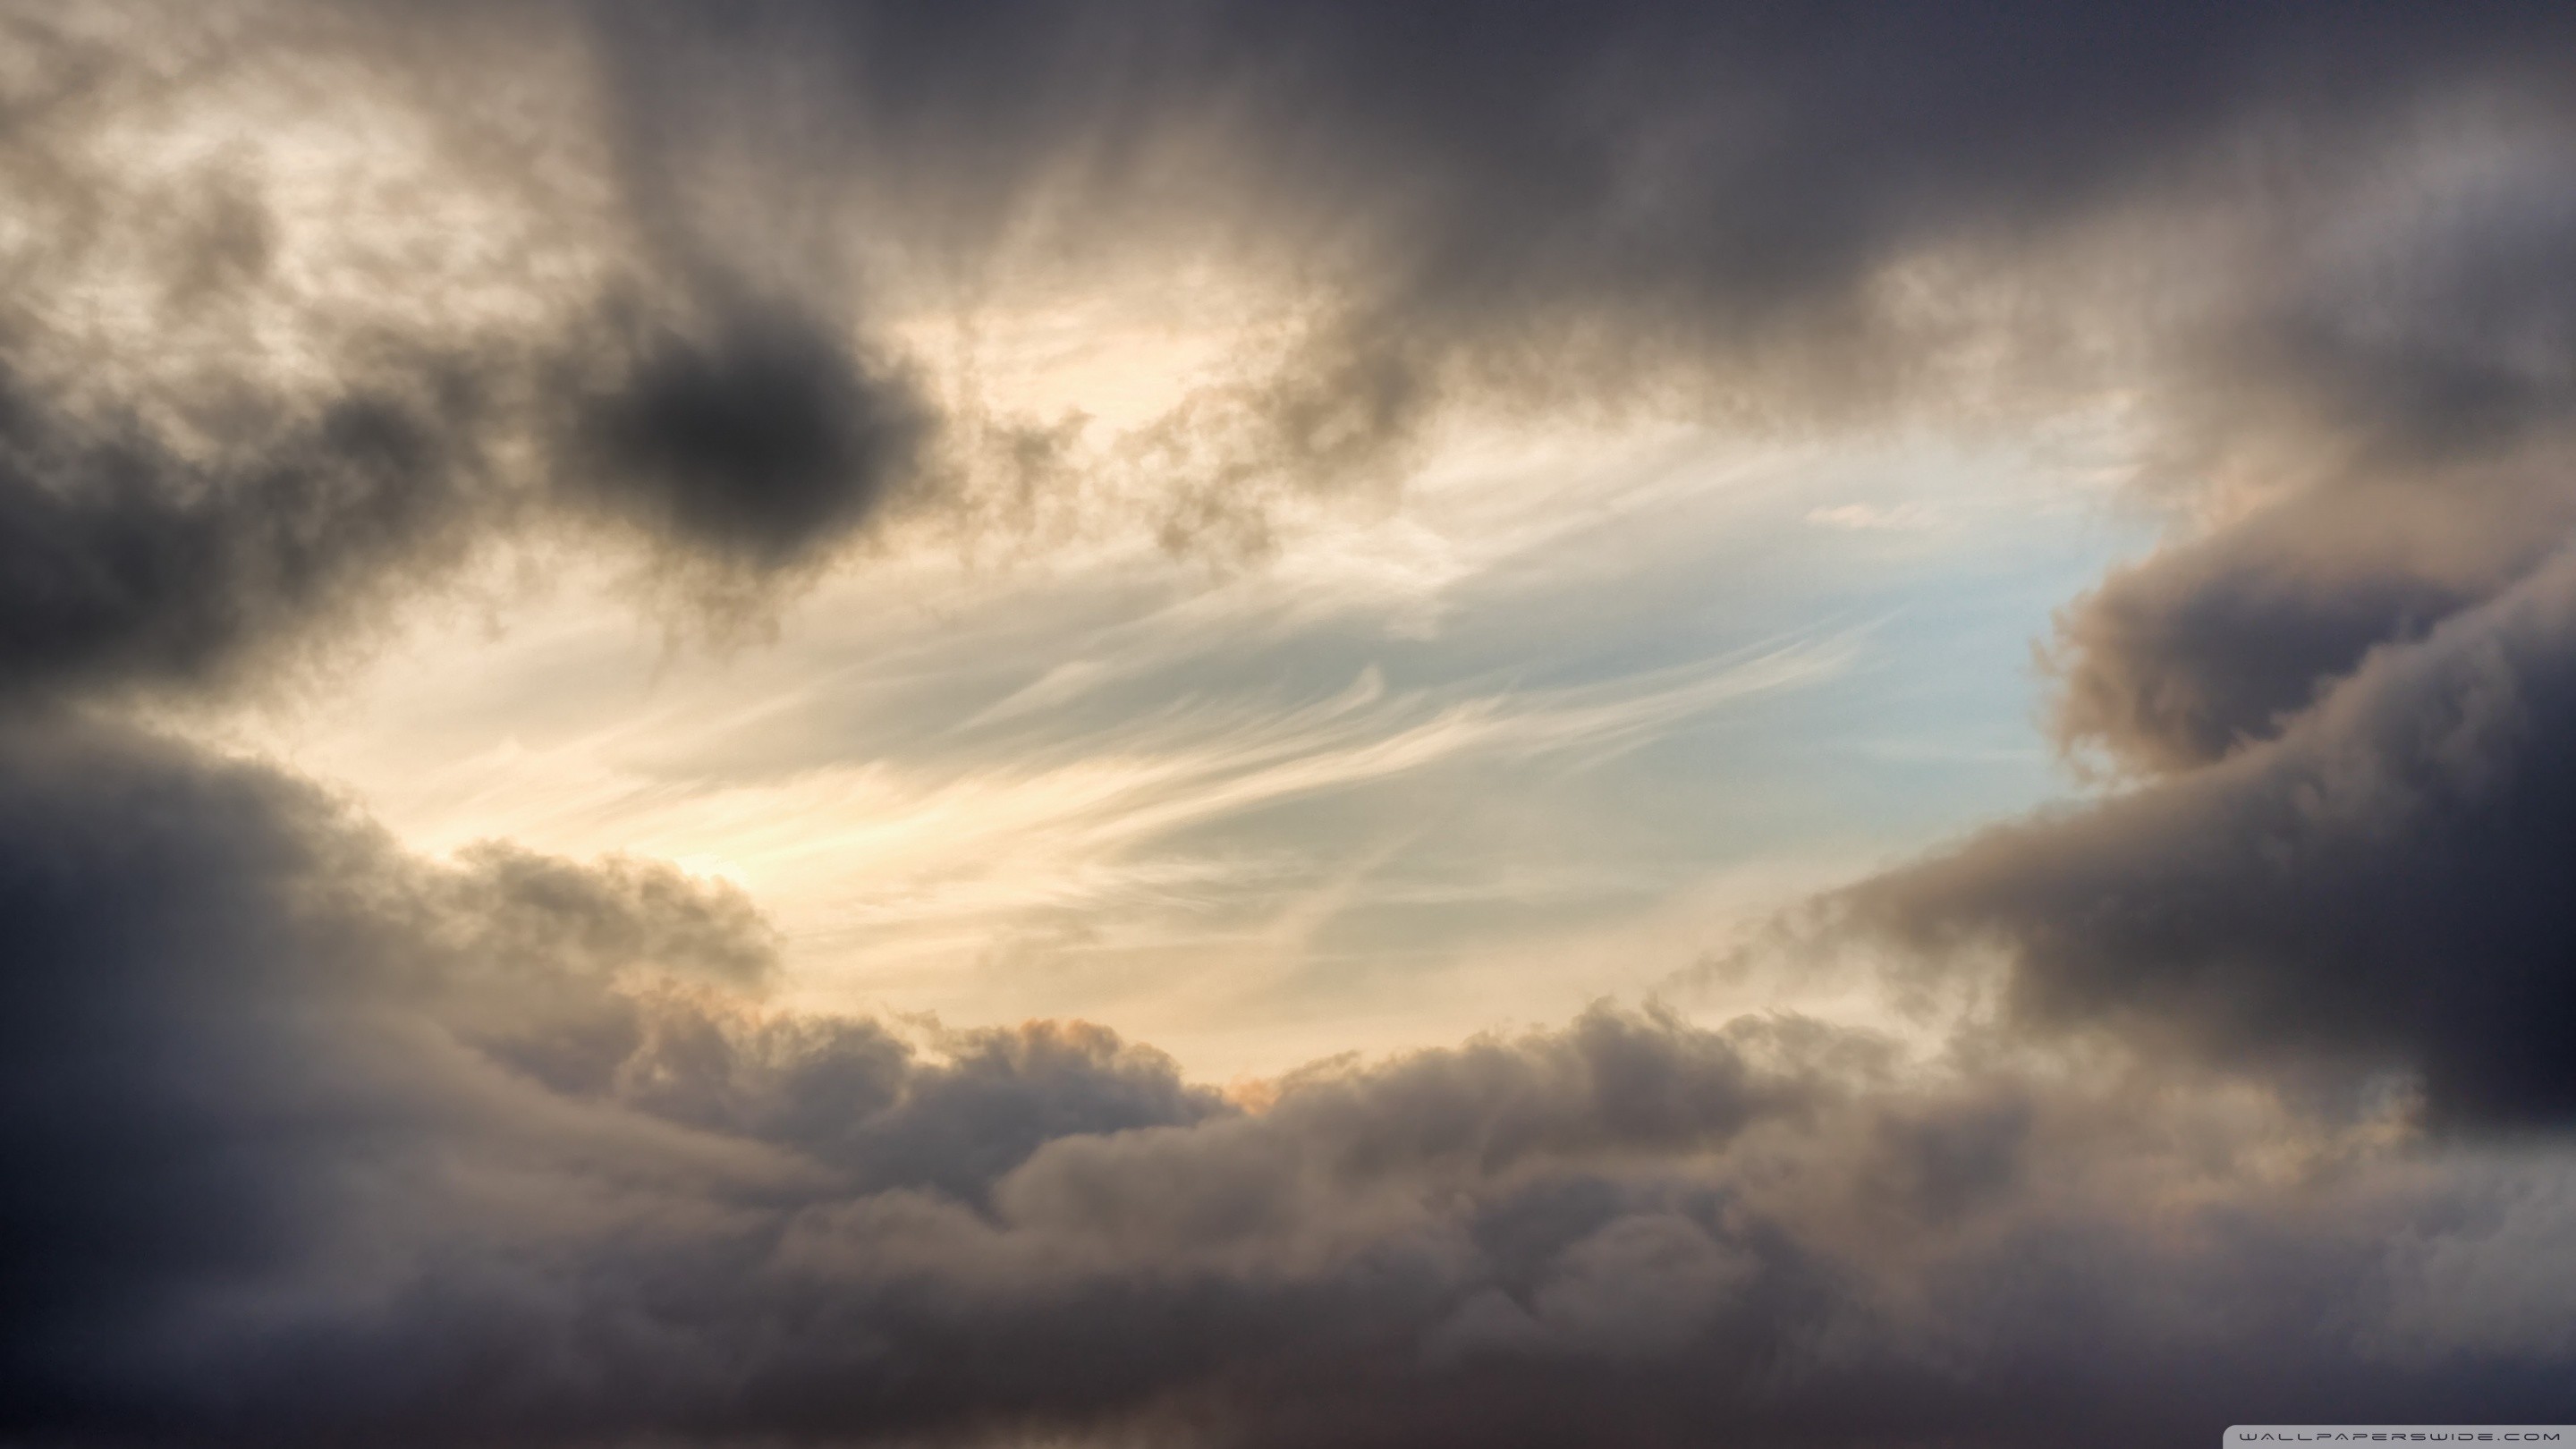 Cloudy Sky Wallpaper (66+ images)